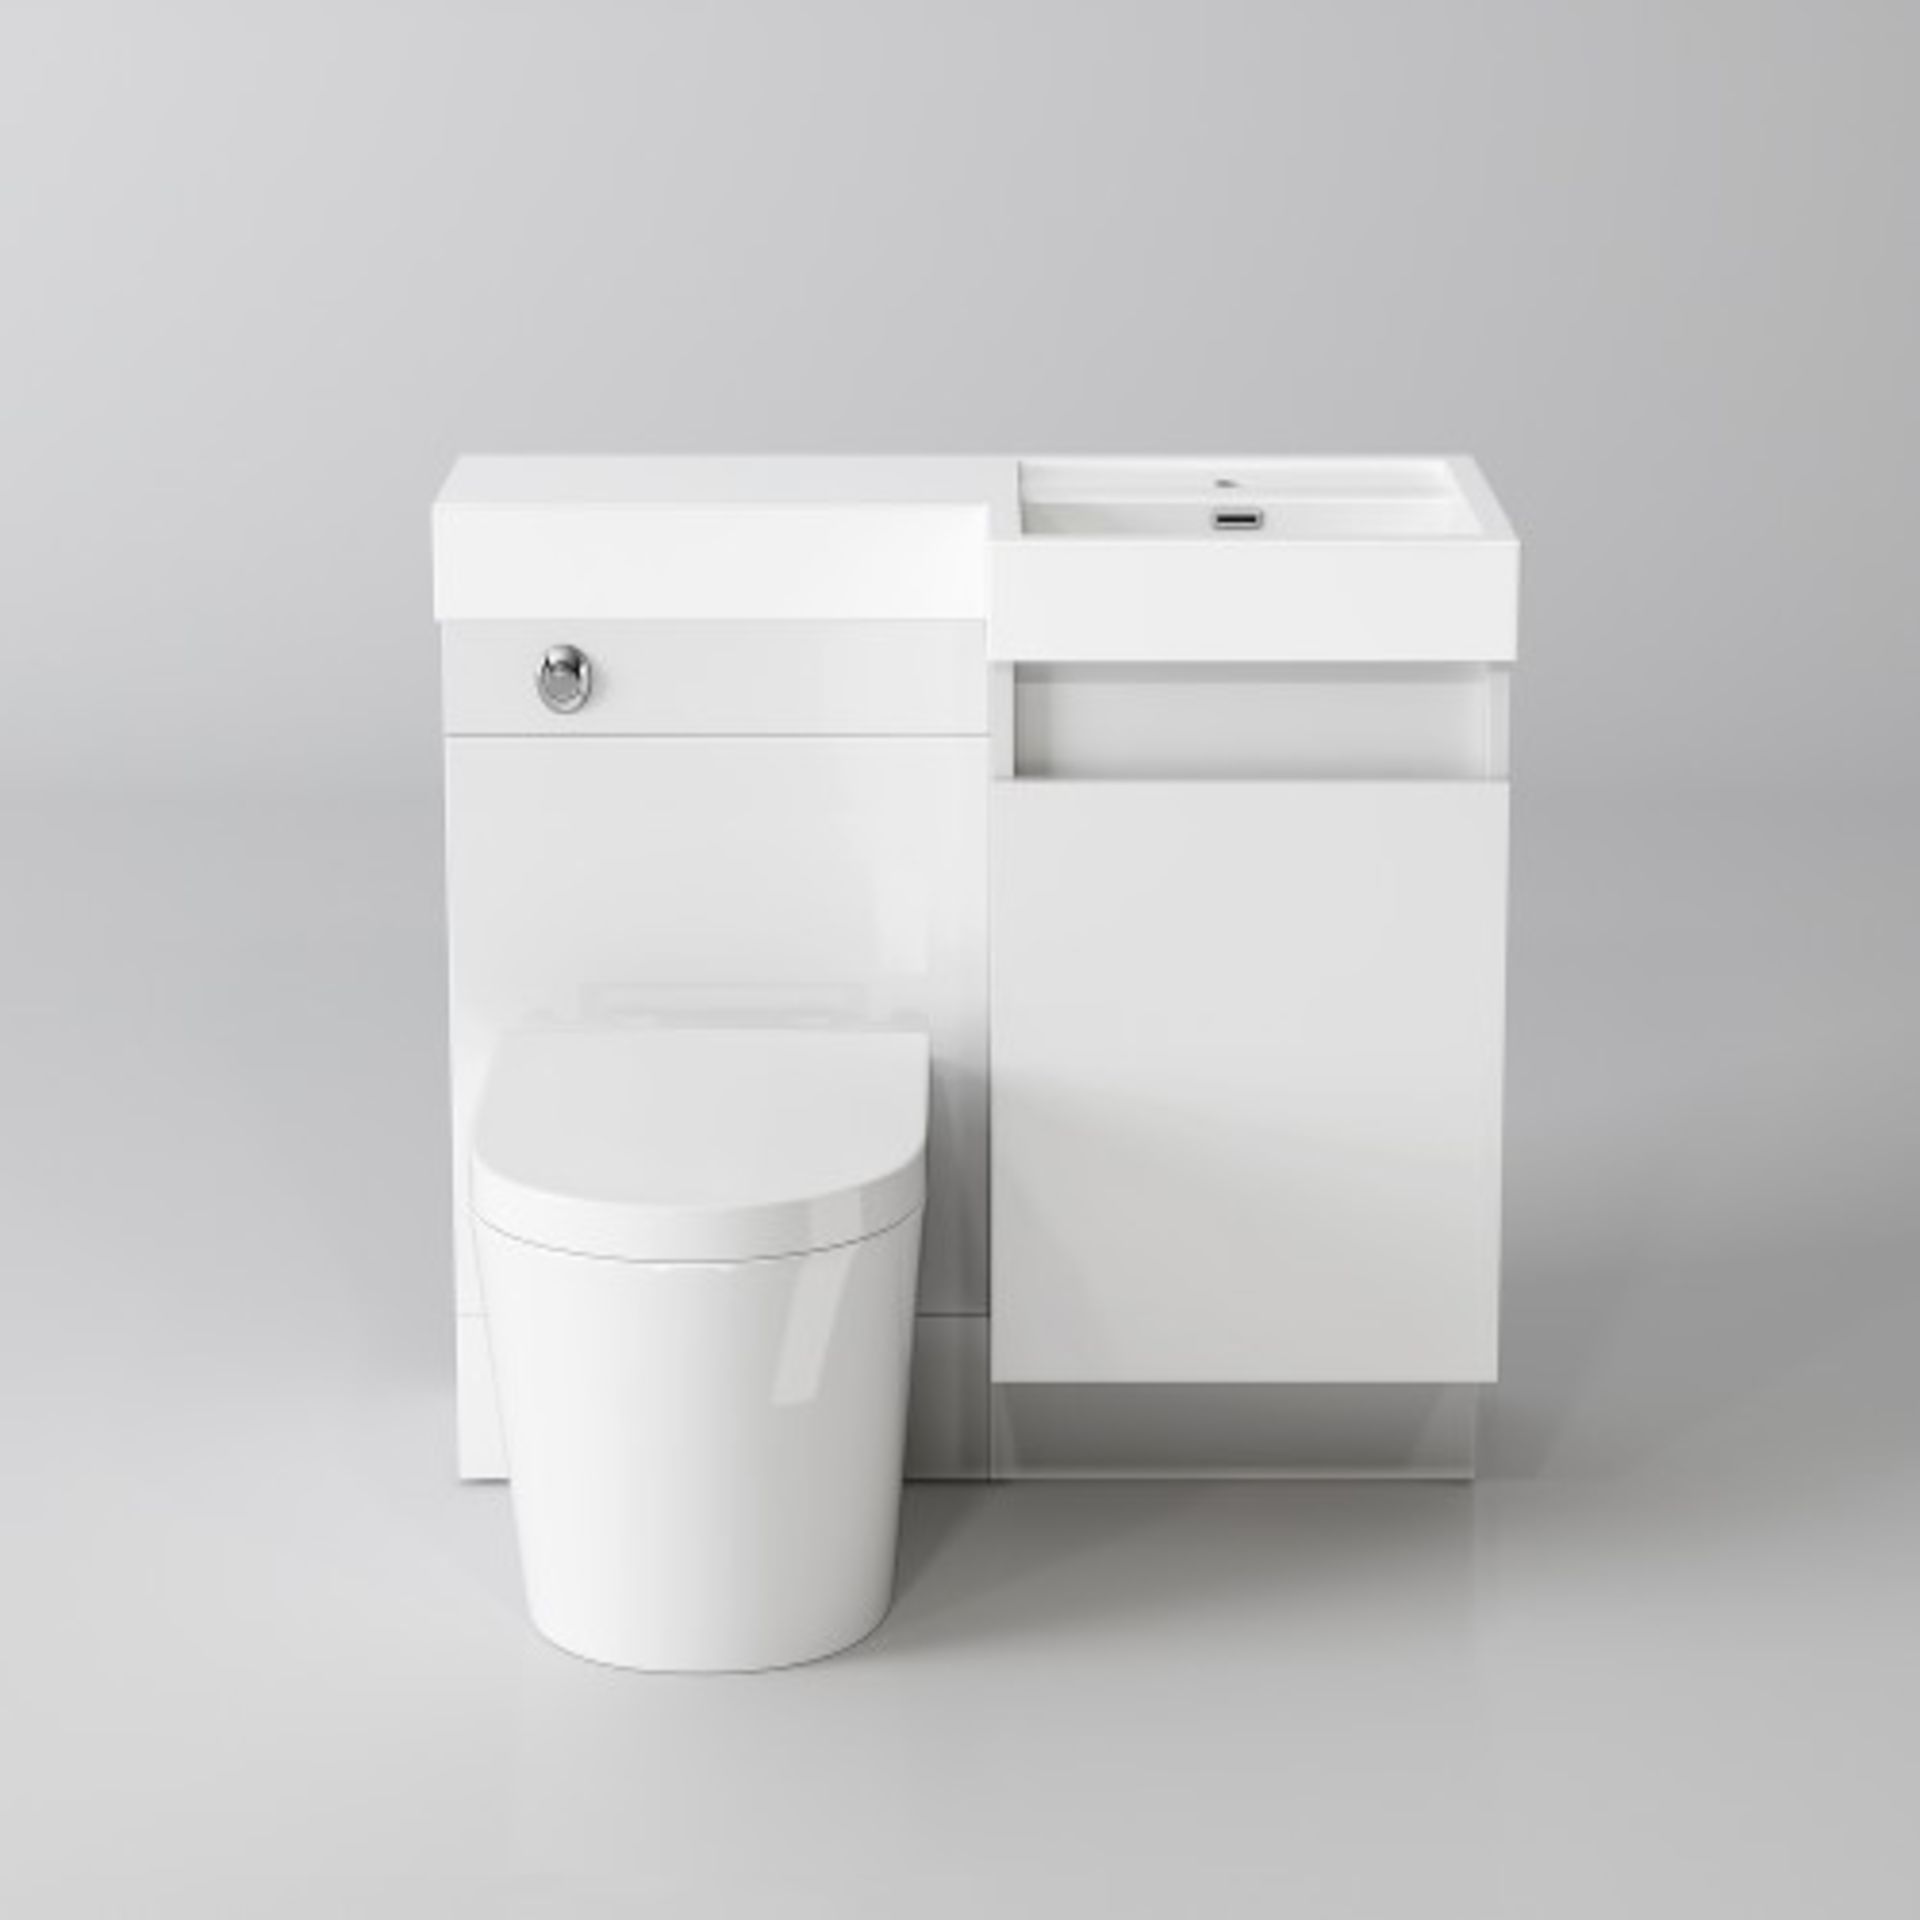 NEW & BOXED 906mm Olympia Gloss White Drawer Vanity Unit - Lyon Pan, Right Hand. Basin, Unit a... - Image 3 of 5